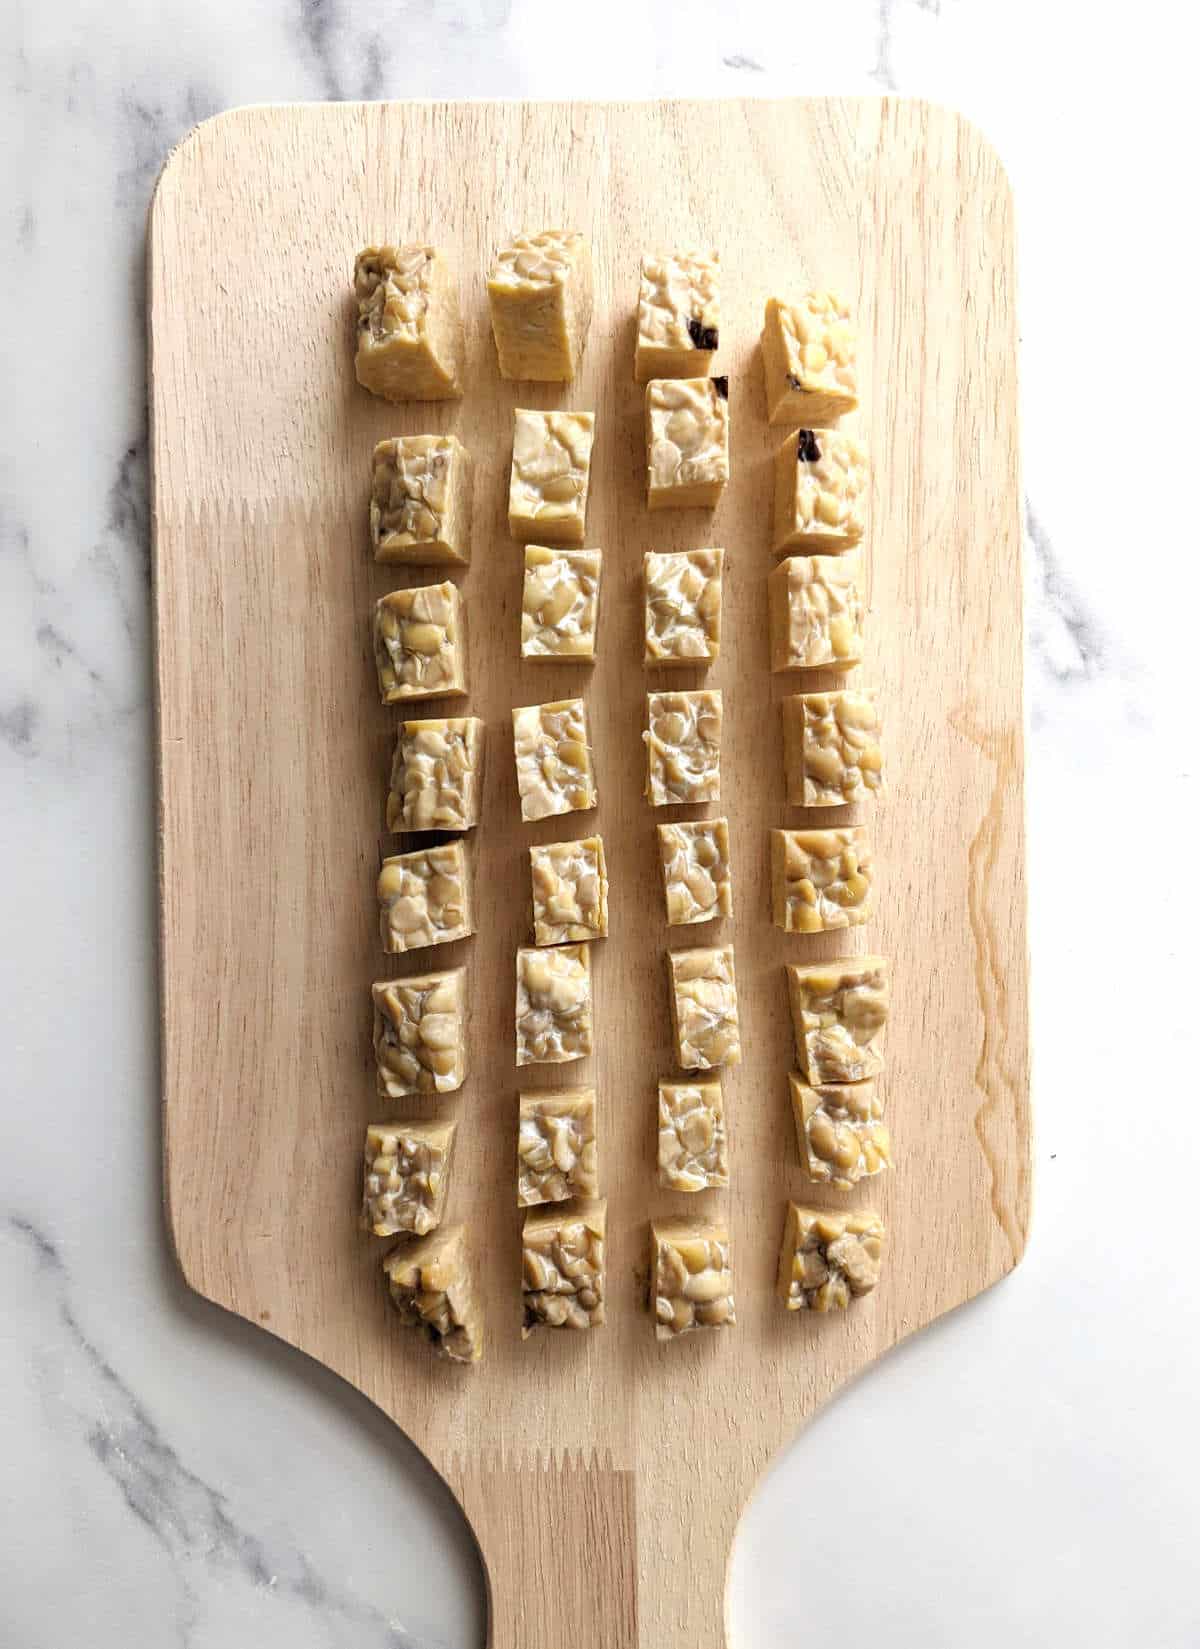 Cubed tempeh pieces on a cutting board